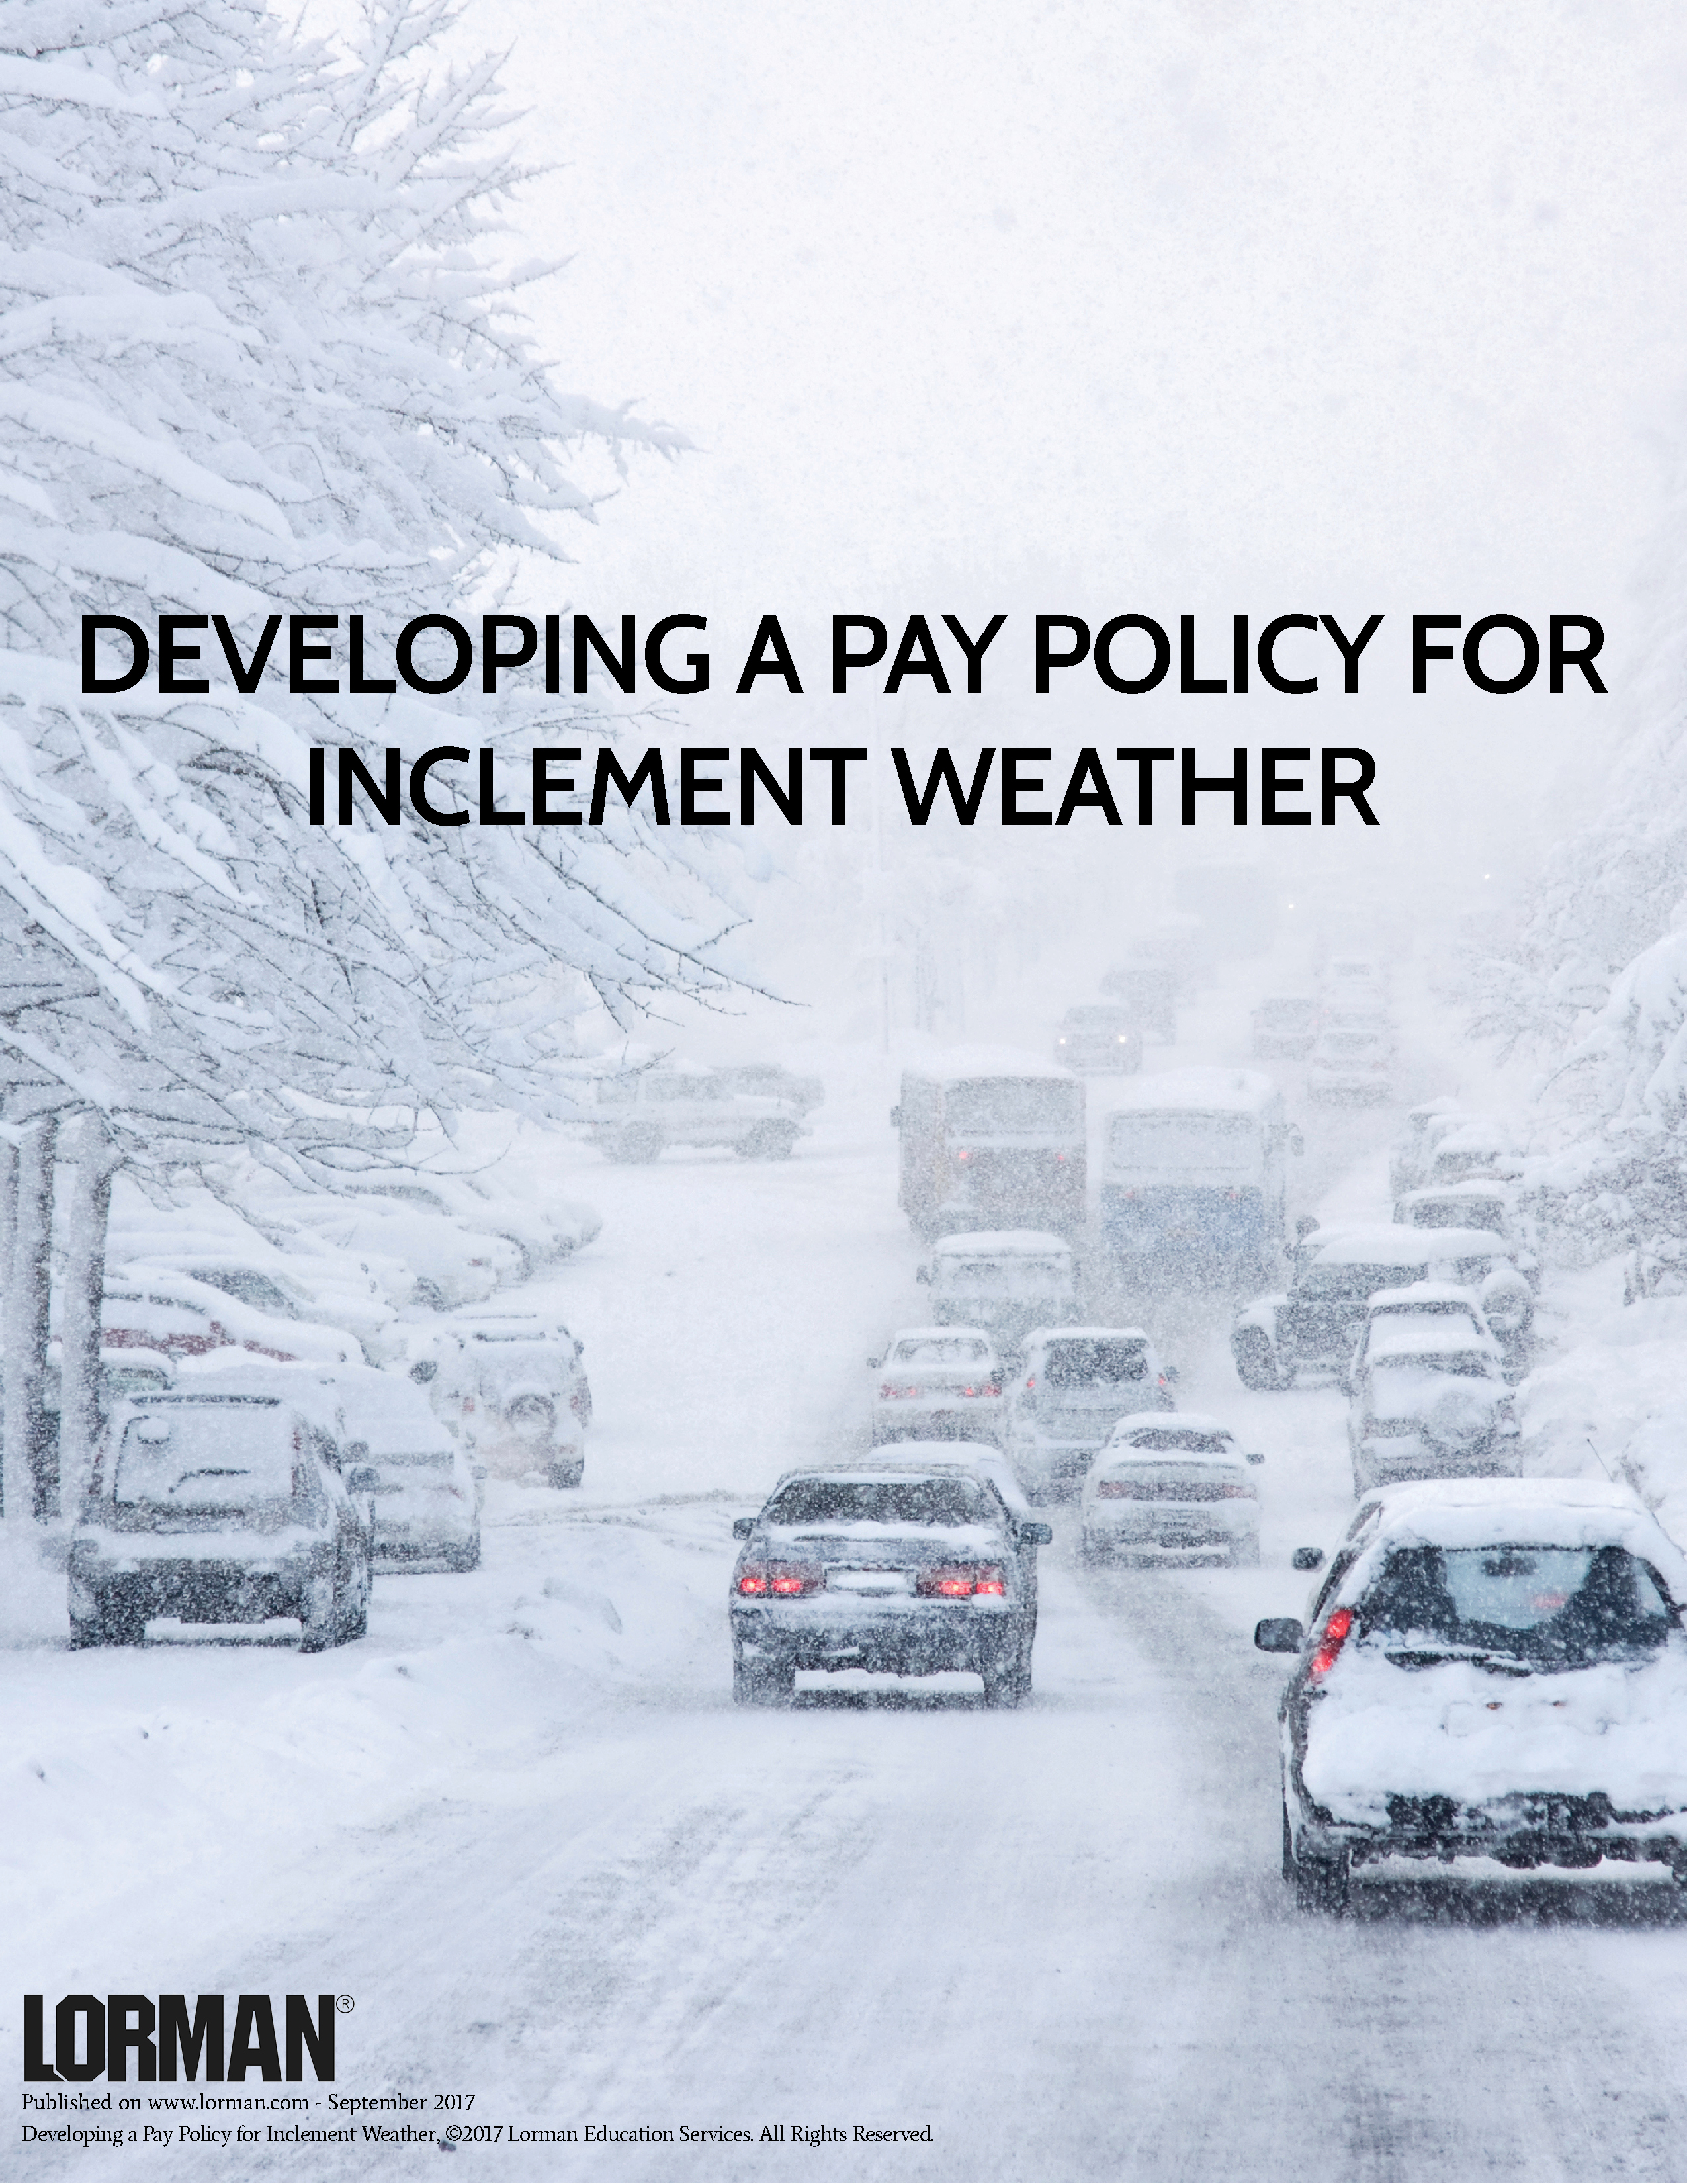 Developing a Pay Policy for Inclement Weather